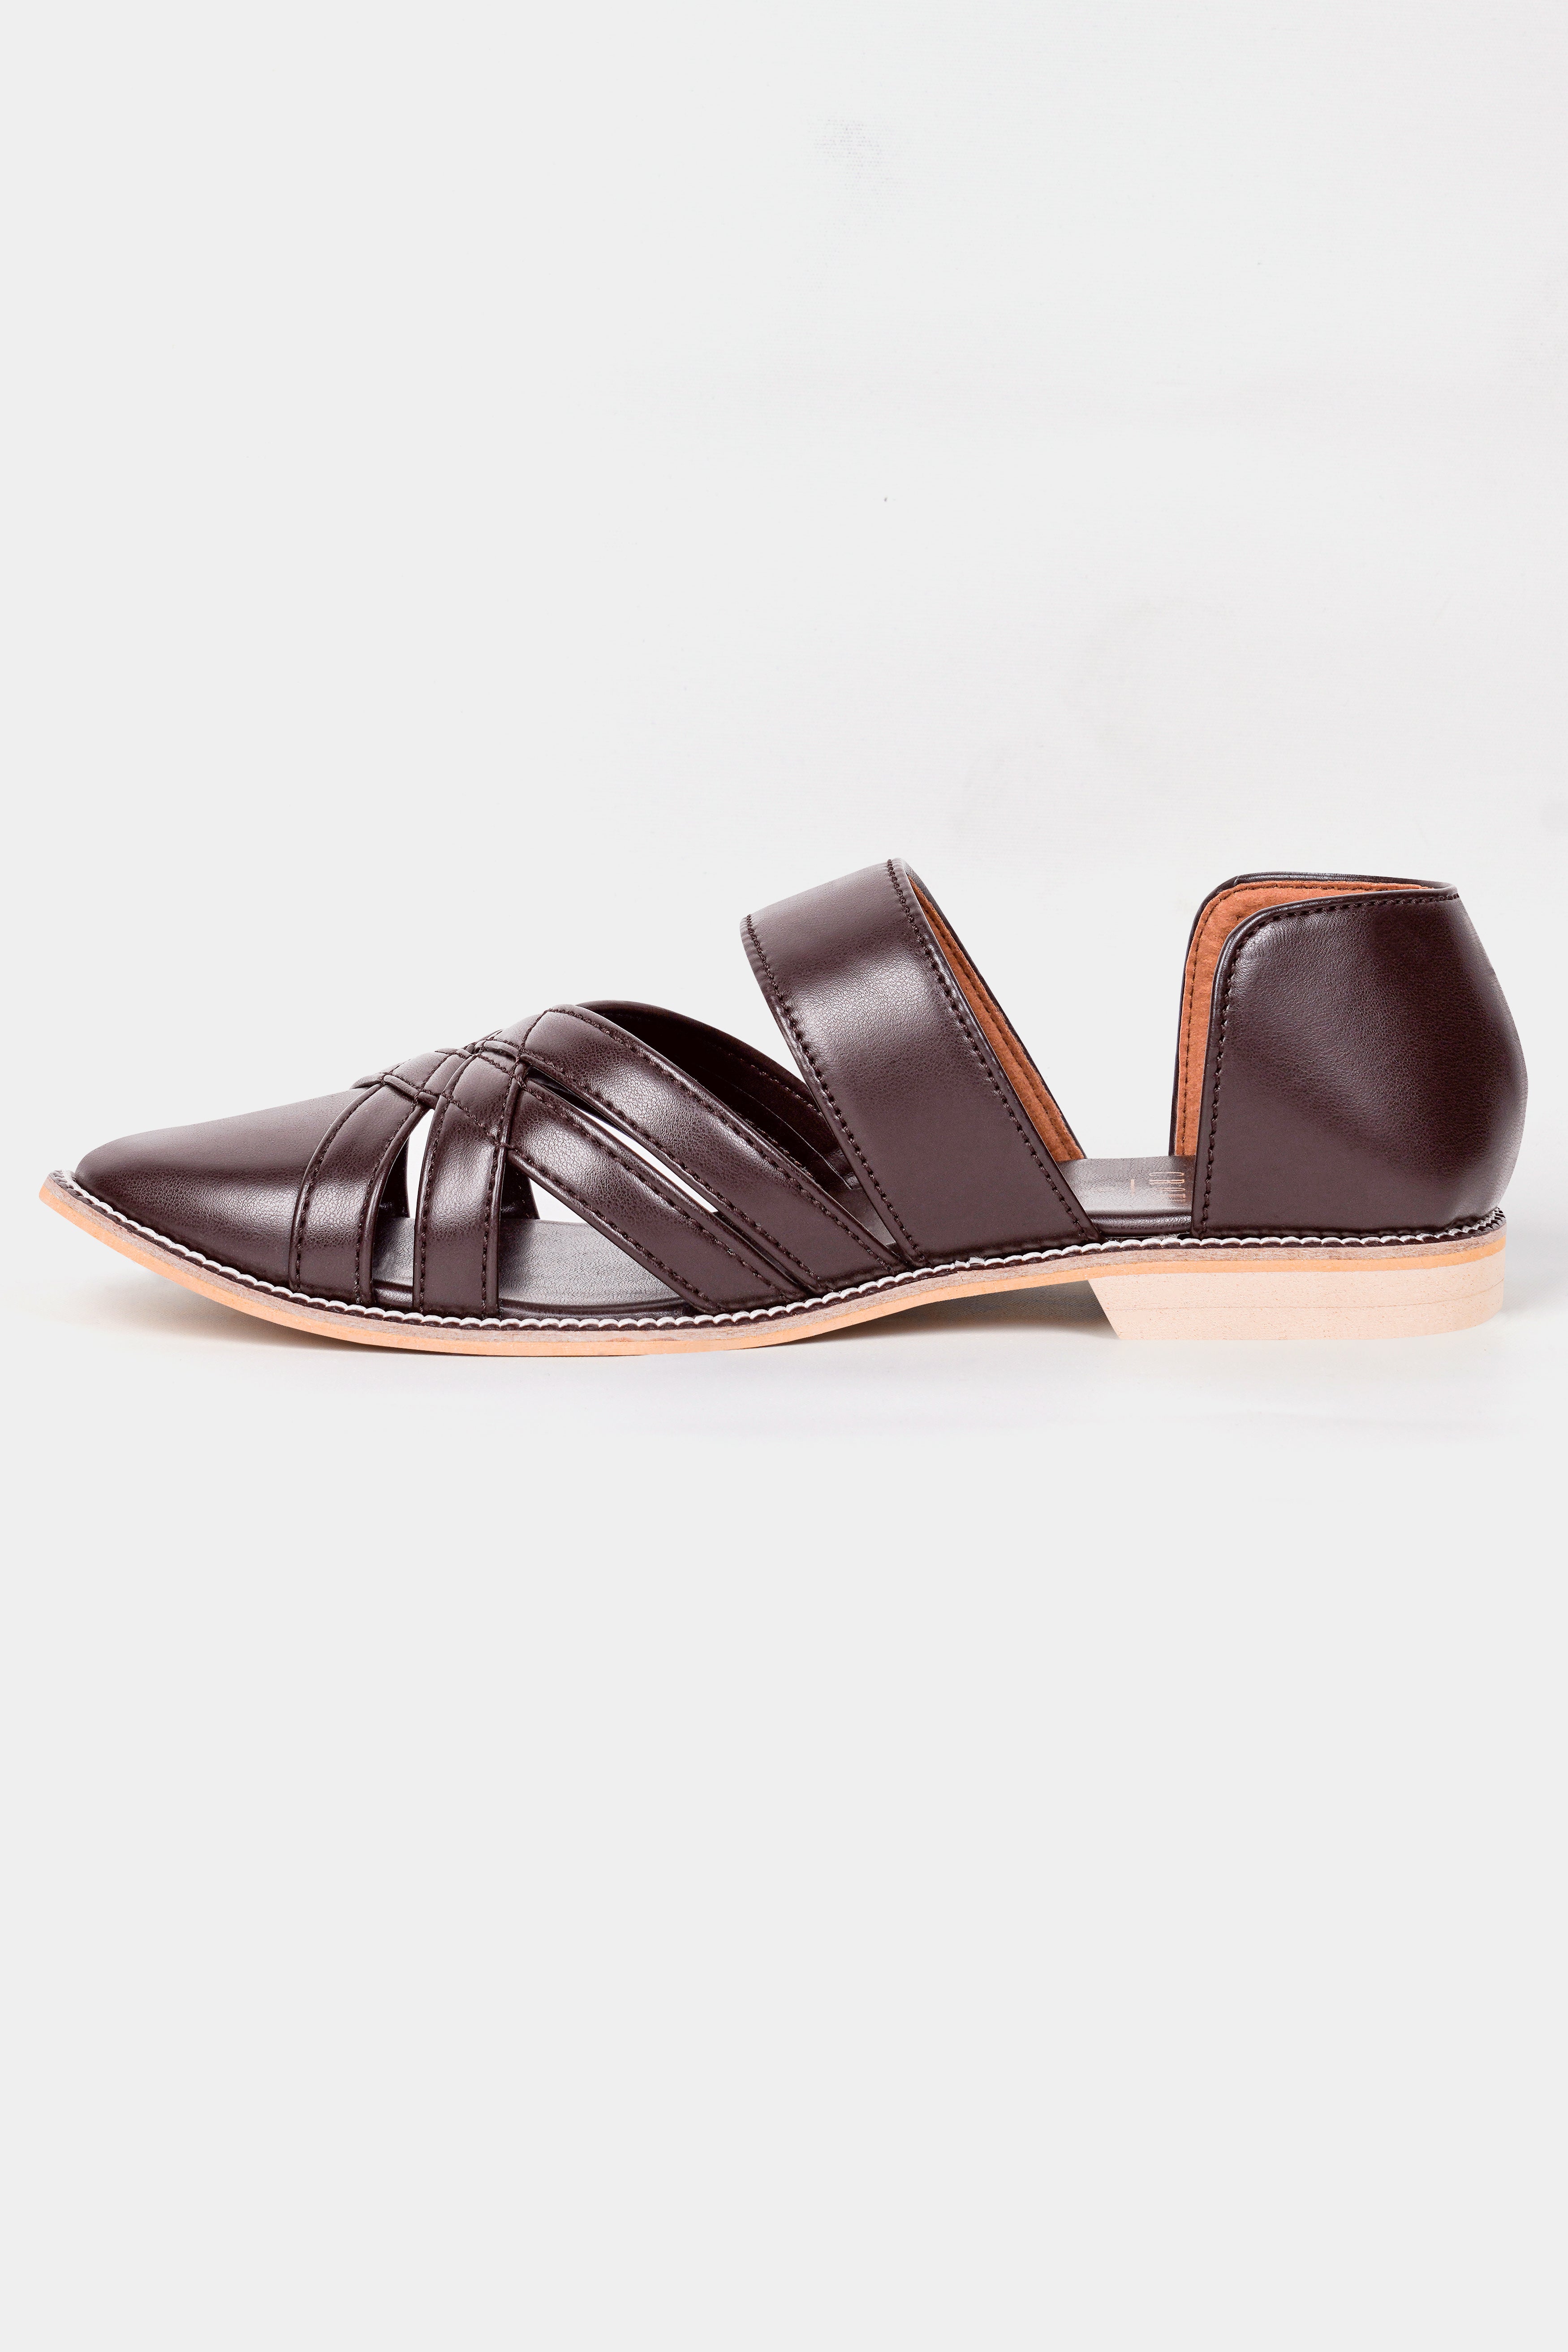 Dark Brown Criss Cross Vegan Leather Hand Stitched Pathanis Sandal FT139-6, FT139-7, FT139-8, FT139-9, FT139-10, FT139-11